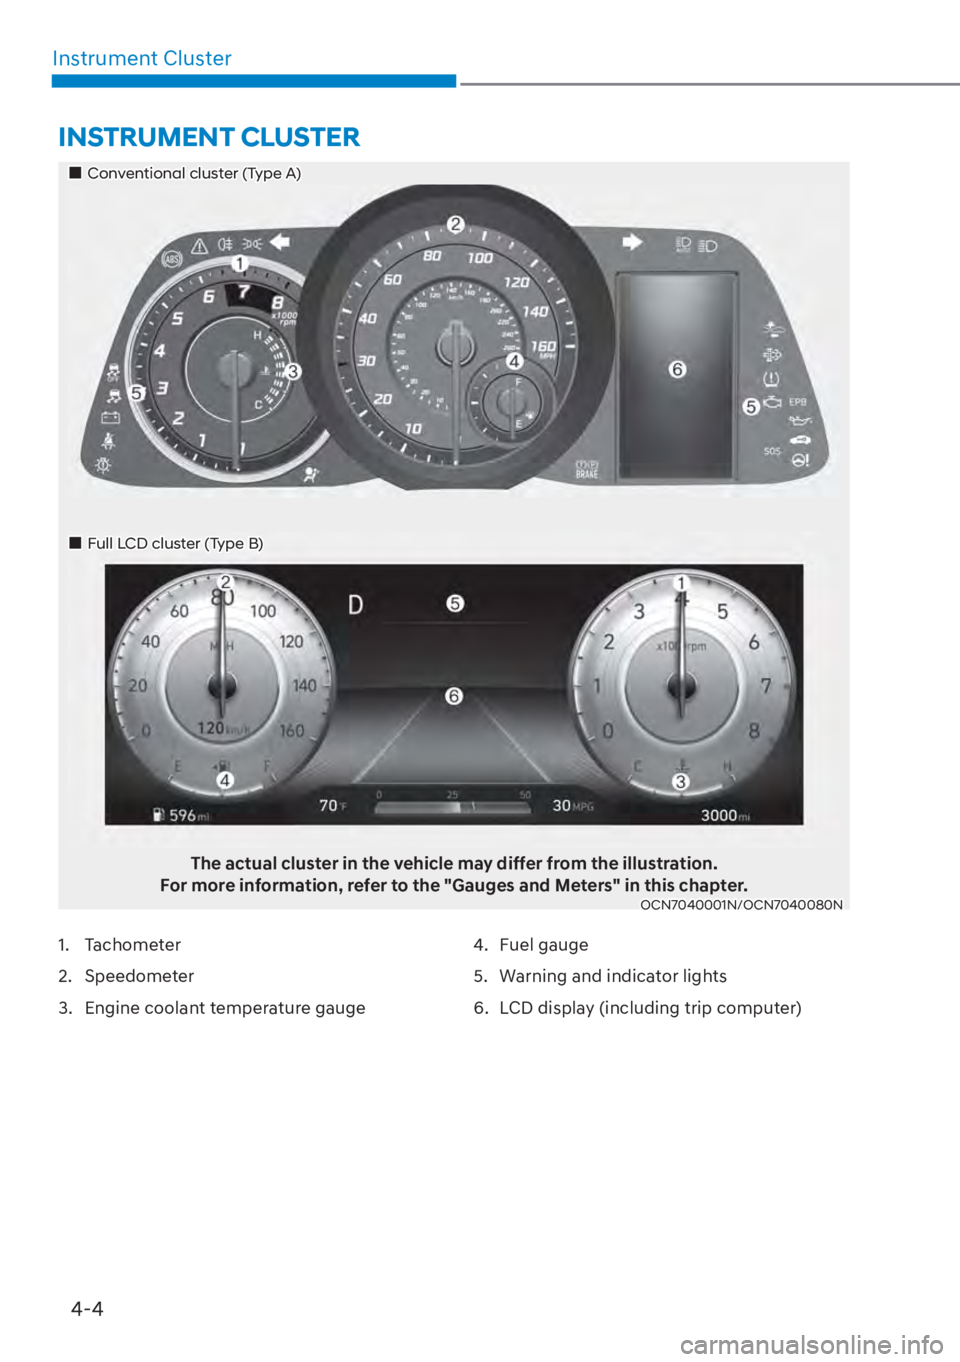 HYUNDAI ELANTRA 2023  Owners Manual 4-4
Instrument Cluster
The actual cluster in the vehicle may differ from the illustration.
For more information, refer to the "Gauges and Meters" in this chapter.
OCN7040001N/OCN7040080N
INSTRUMENT CL